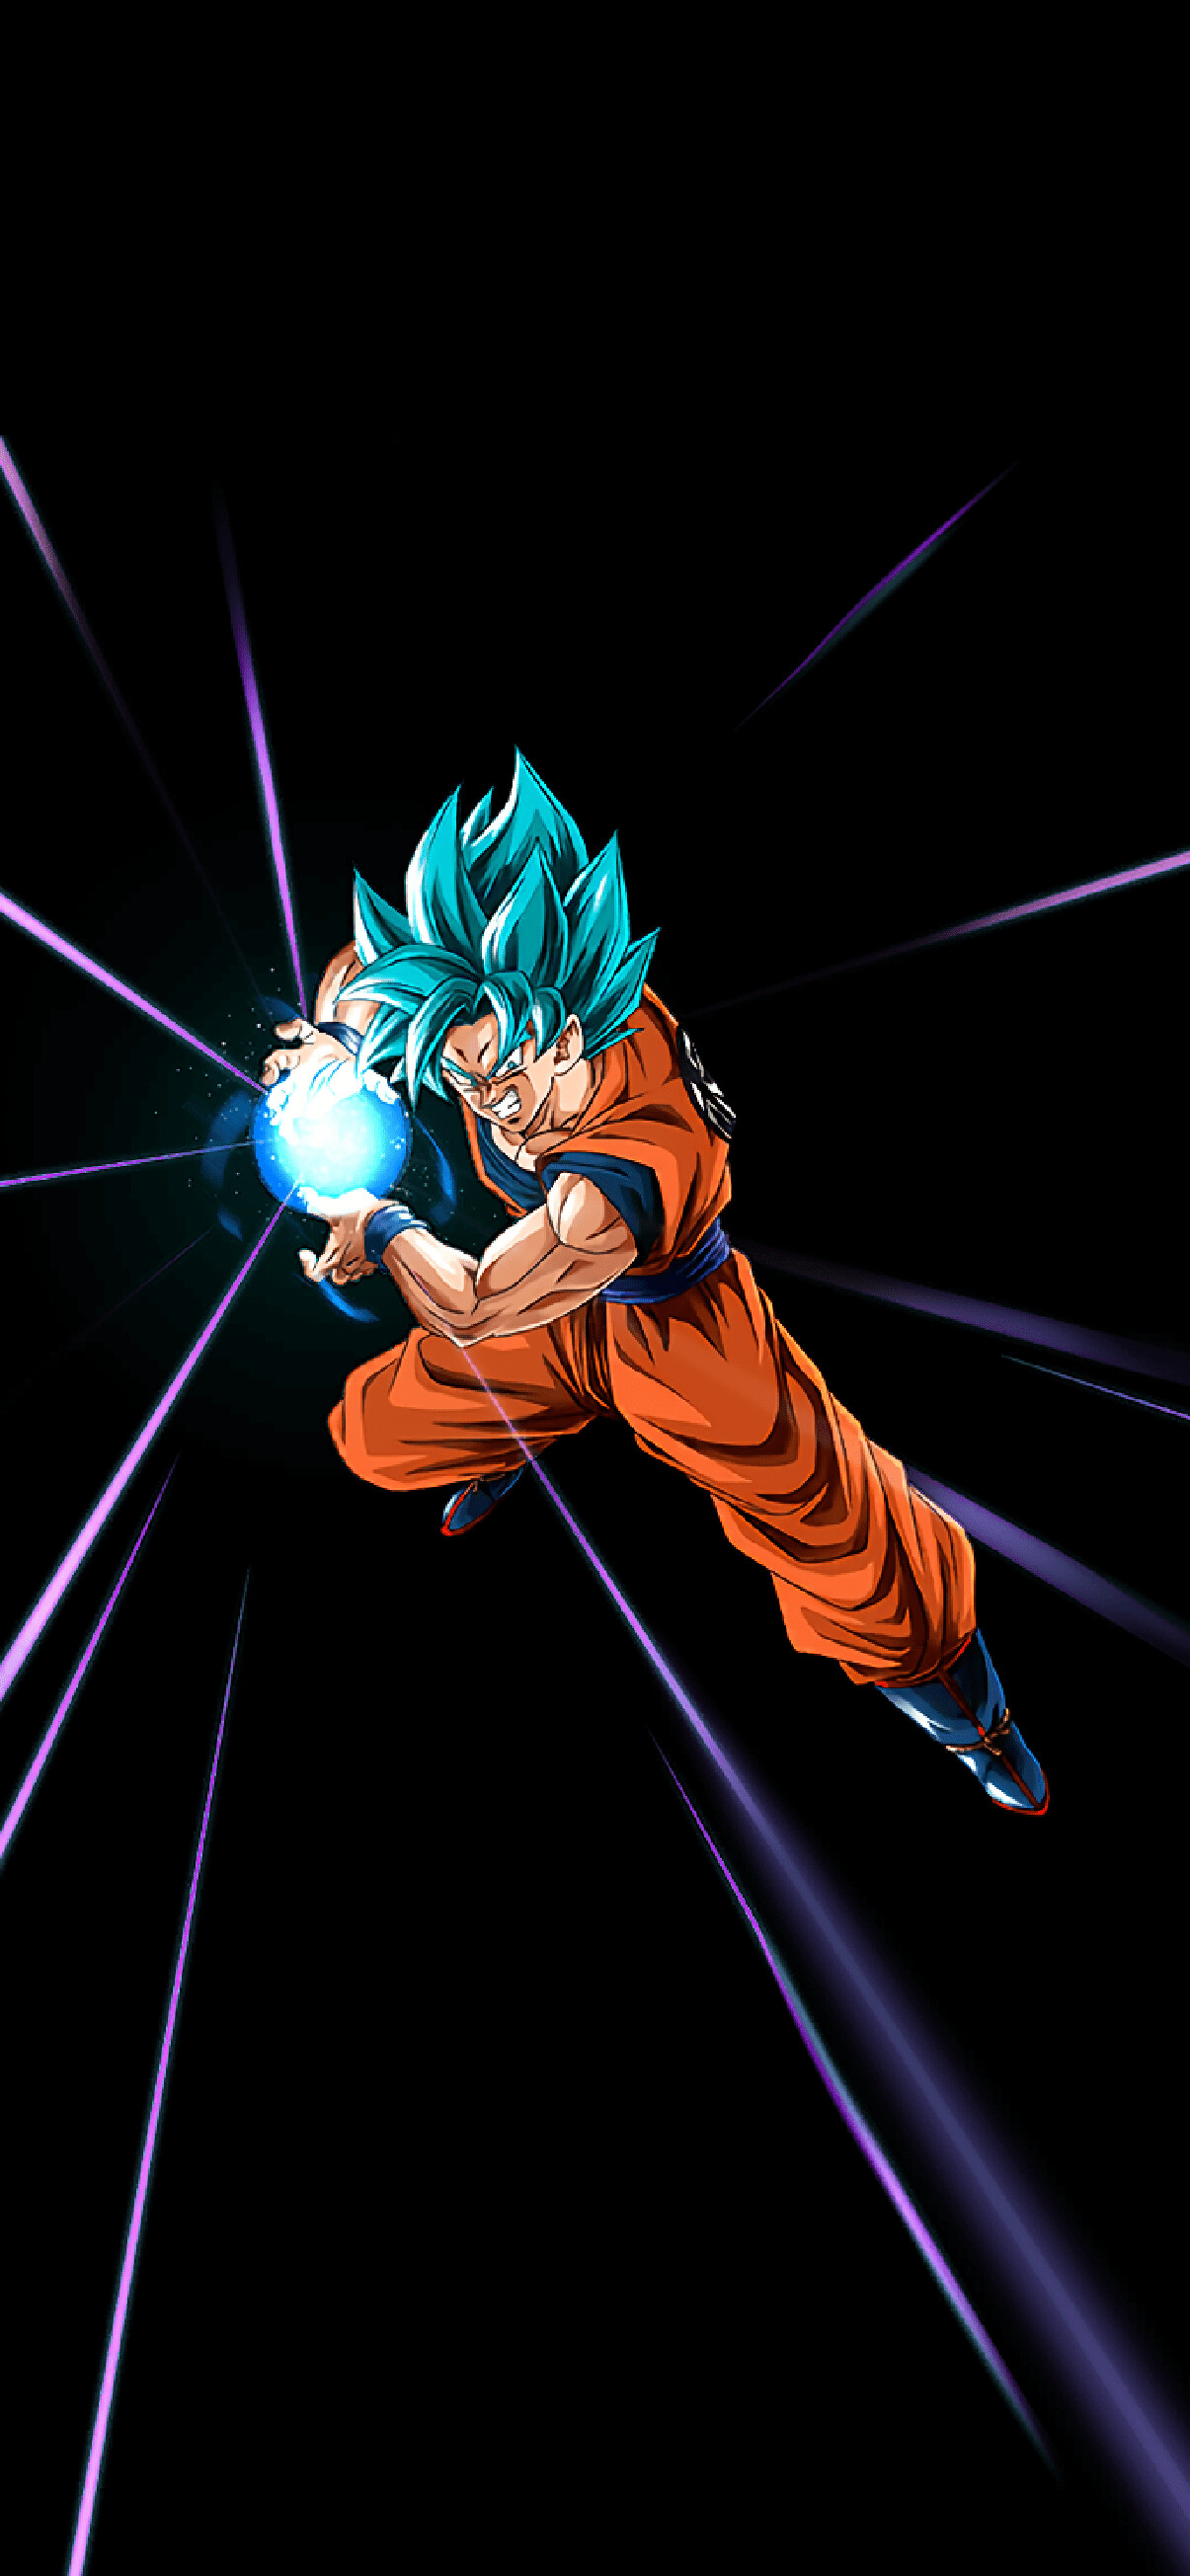 Goku Kamehameha: Dragon Ball, A boy with superhuman strength, Shooting out a streaming, powerful beam of energy. 1210x2610 HD Background.